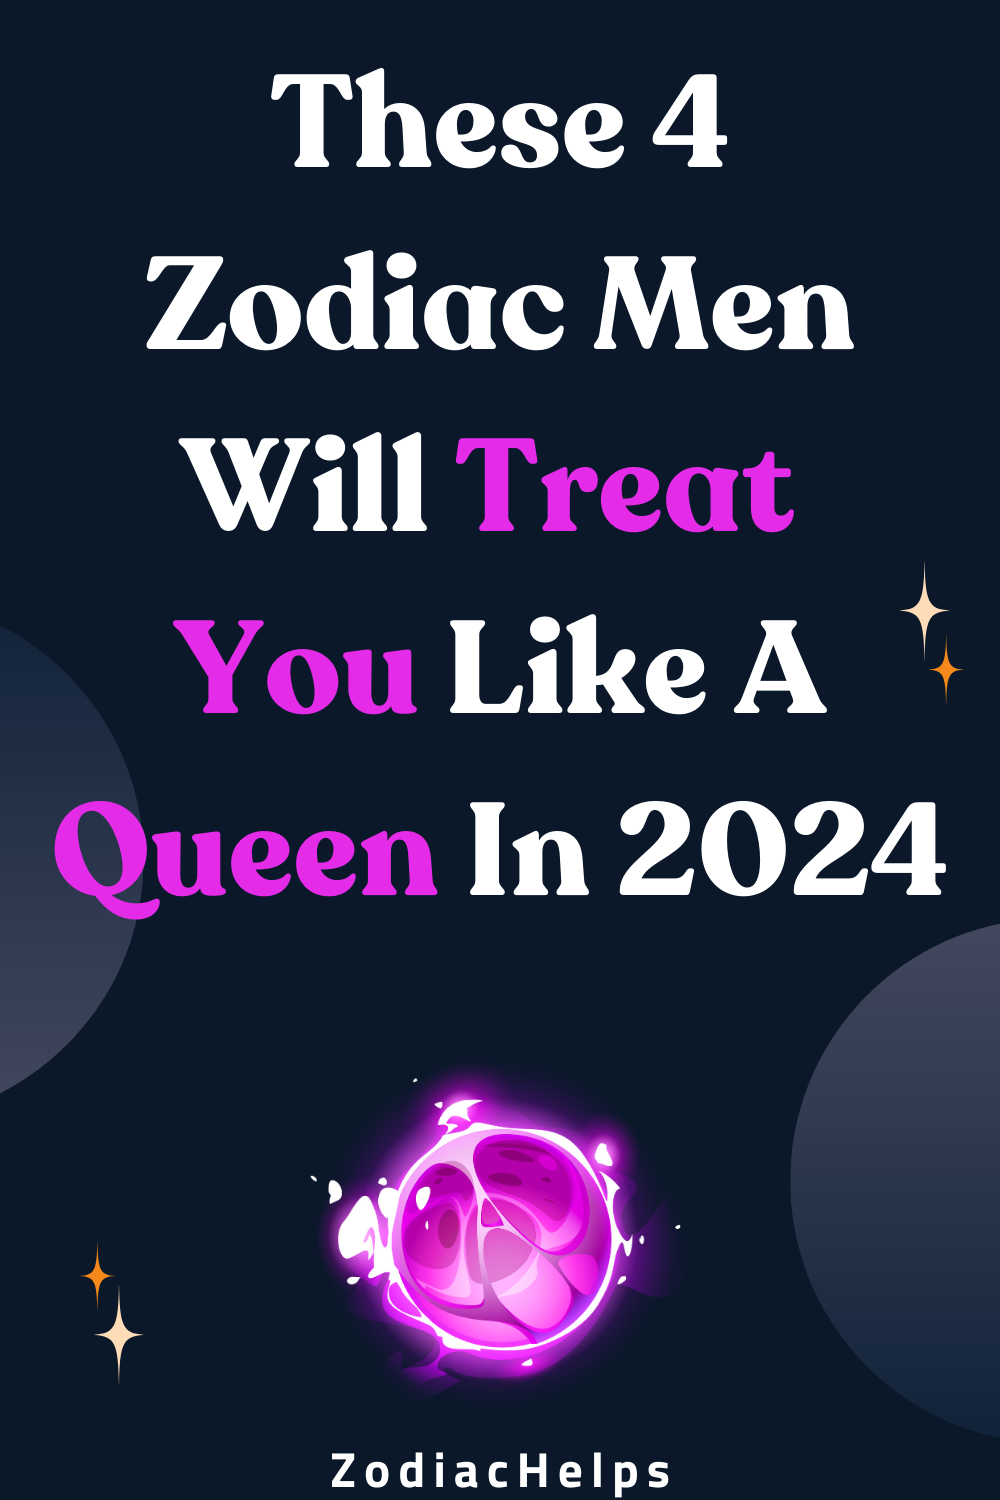 These 4 Zodiac Men Will Treat You Like A Queen In 2024